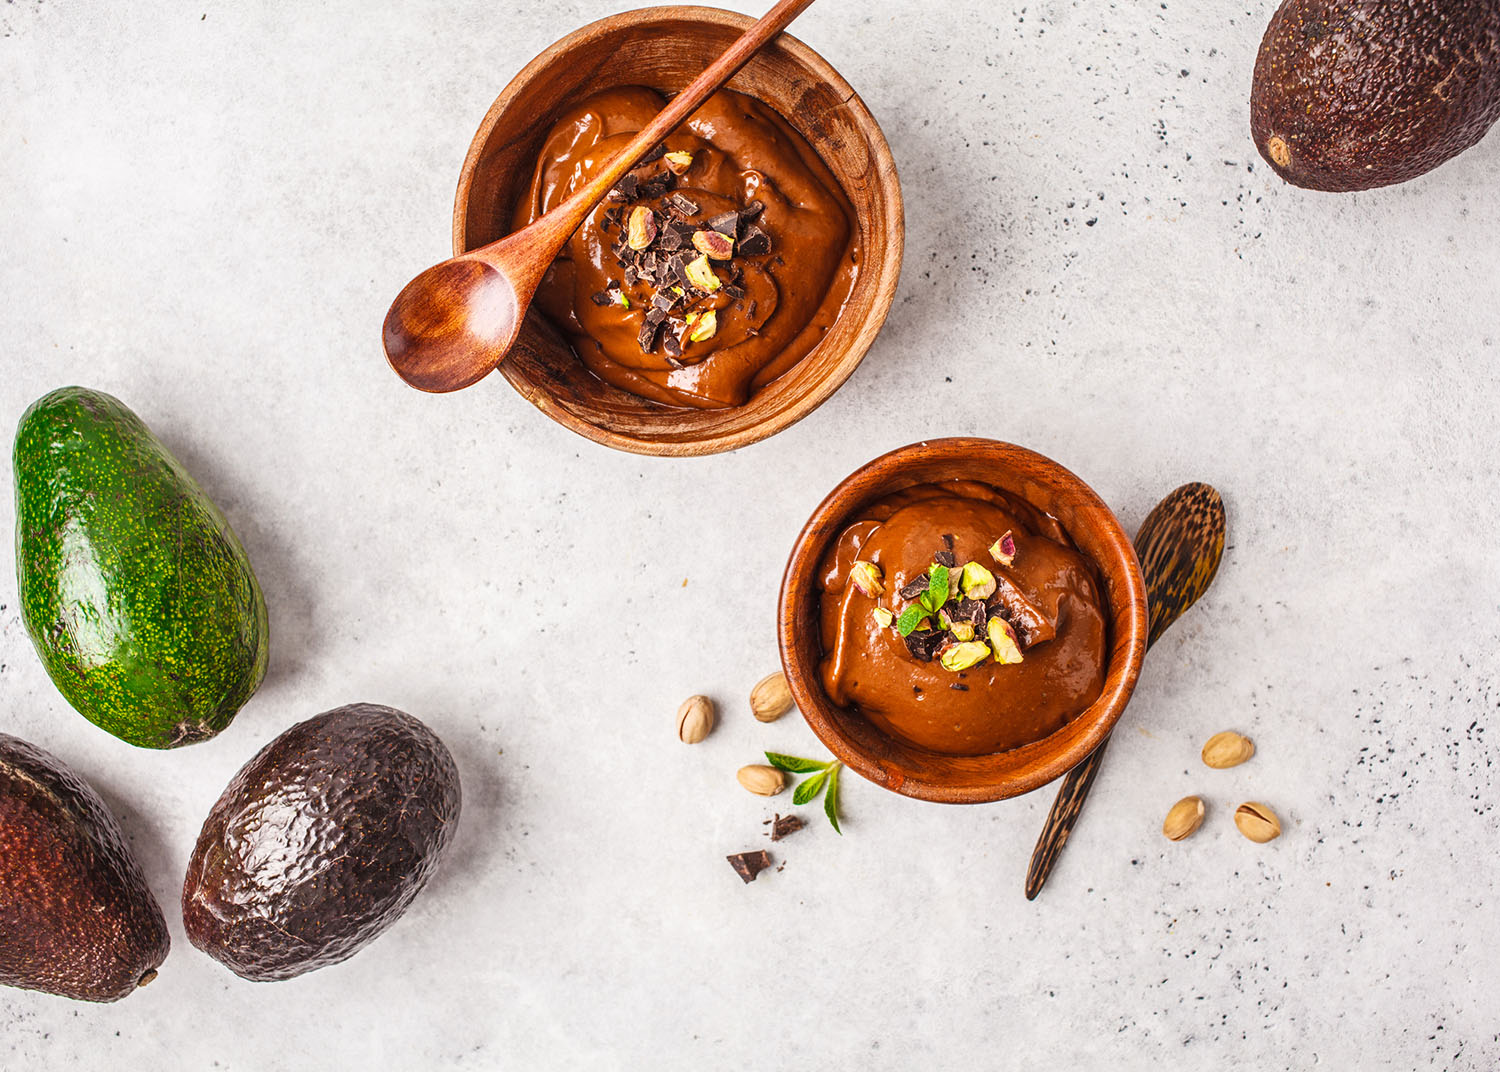 Avocado chocolate mousse with pistachios in a wooden bowl on a white background, top view, copy space.